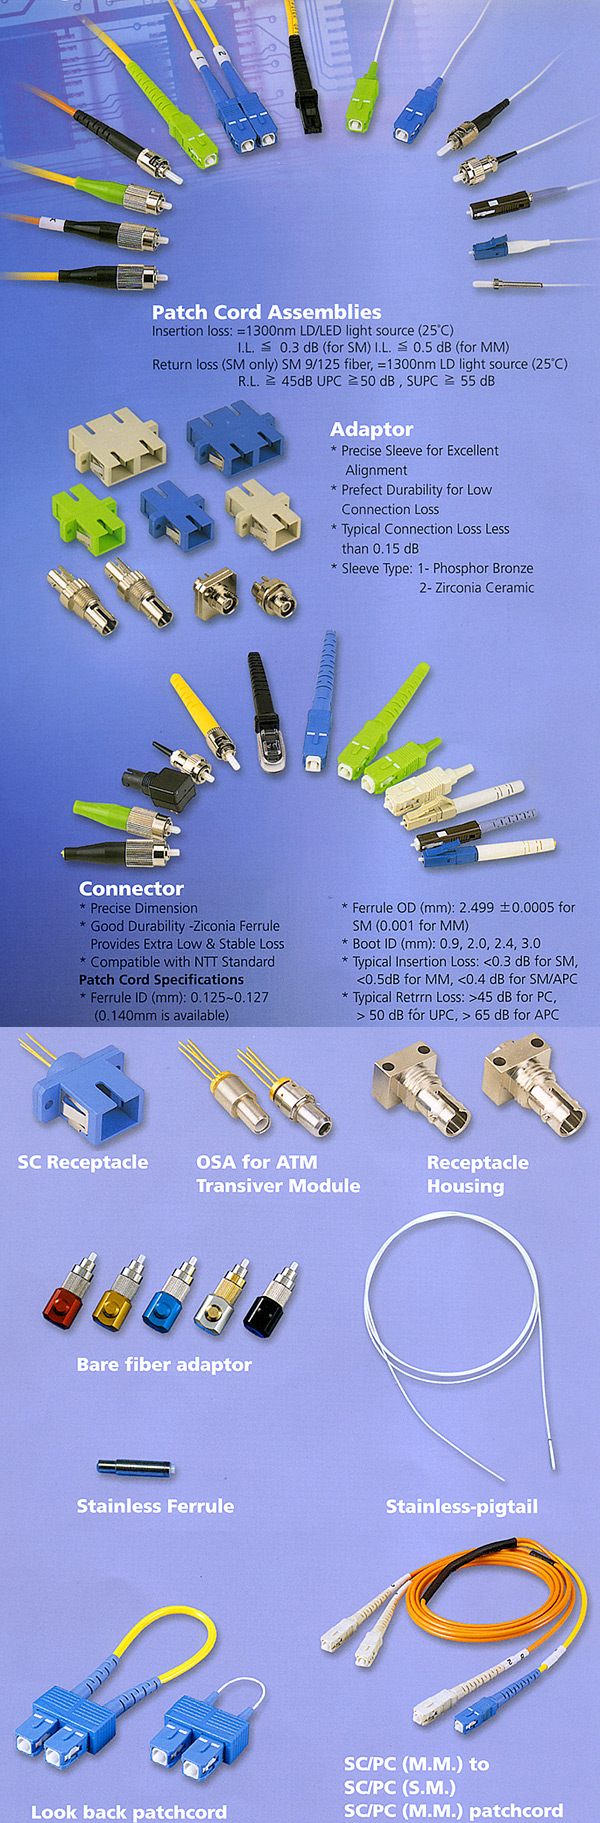 Patch Cord Assemblies, Adaptor, Connector, SC Receptacle, OSA for ATM Transiver Module, Receptacle Housing, Bare Fiber Adaptor, Stainless Ferrule, Stainless-Pigtail, Look Back Patchcord, SC/PC (M.M.) to SC/PC (S.M.), SC/PC (M.M.) Patchcord